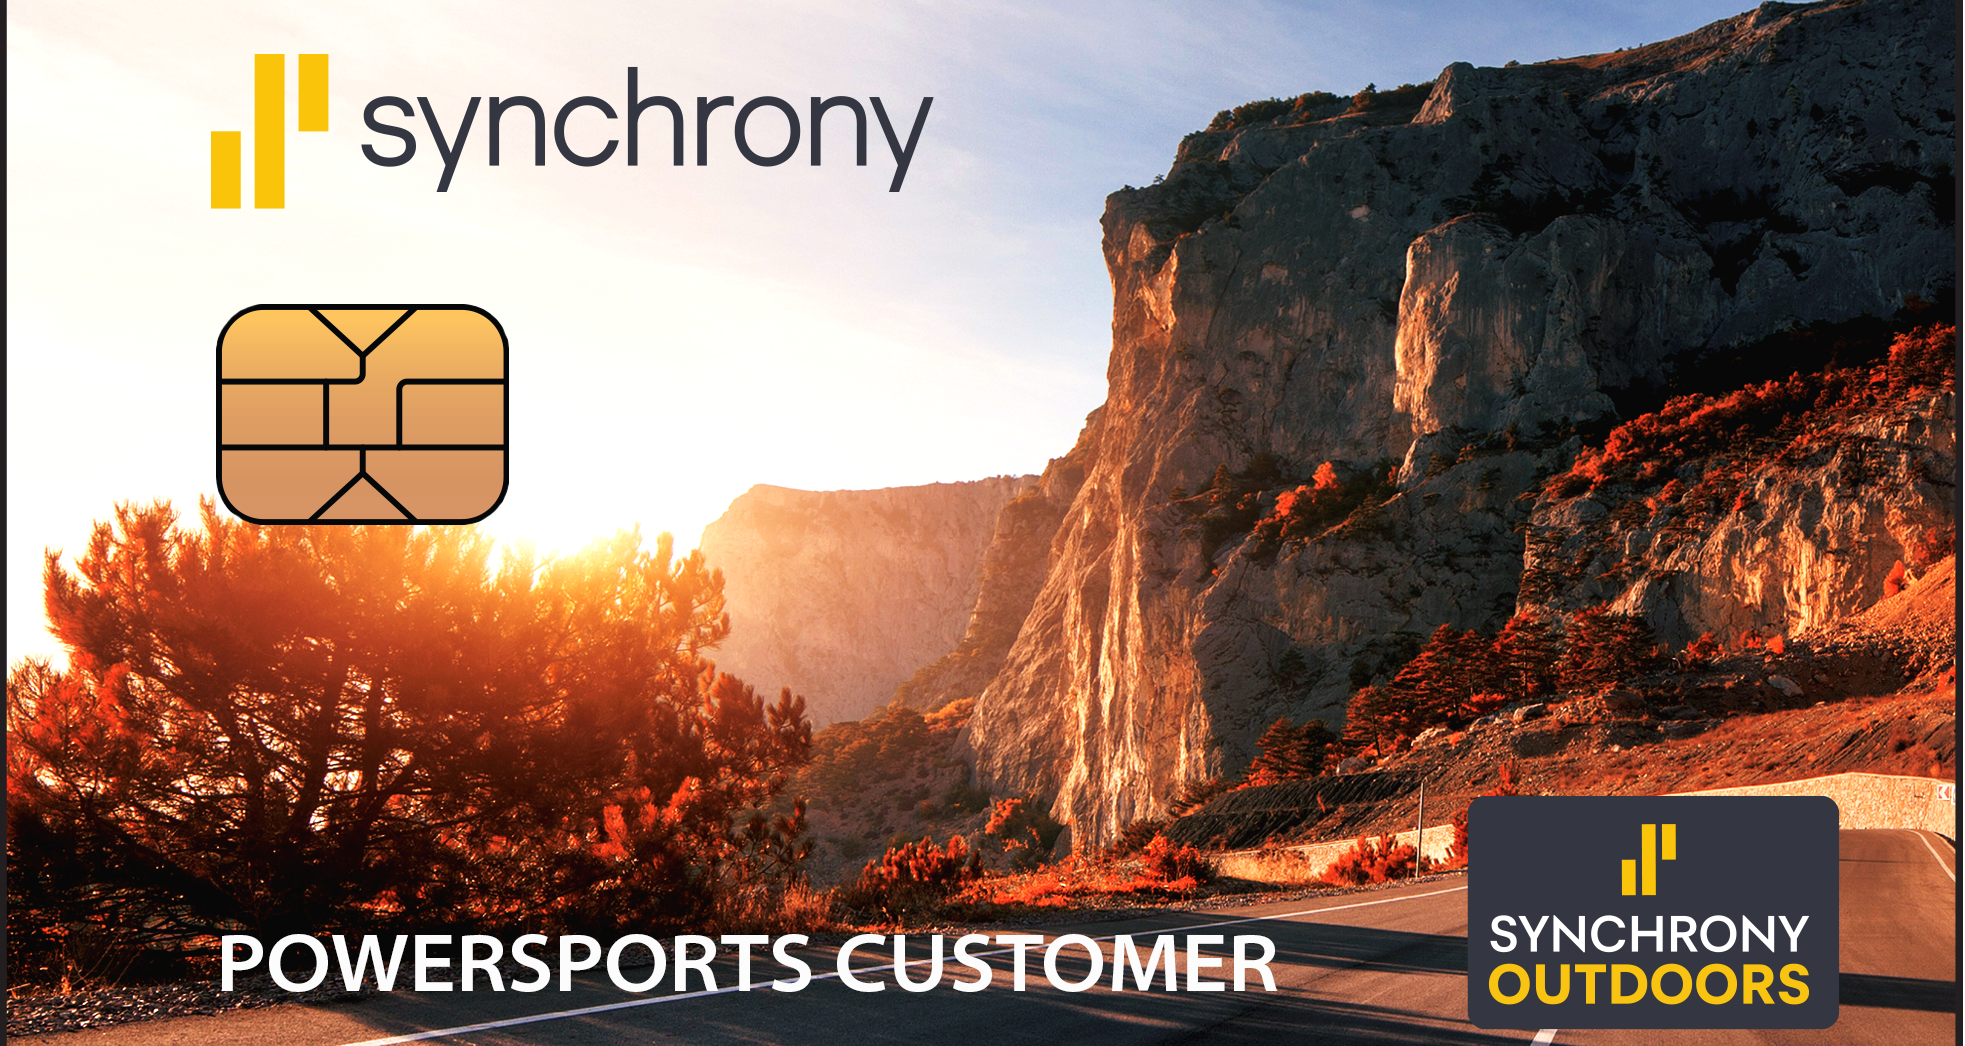 Synchrony announces Outdoor Credit Card for powersports dealers and enthusiasts